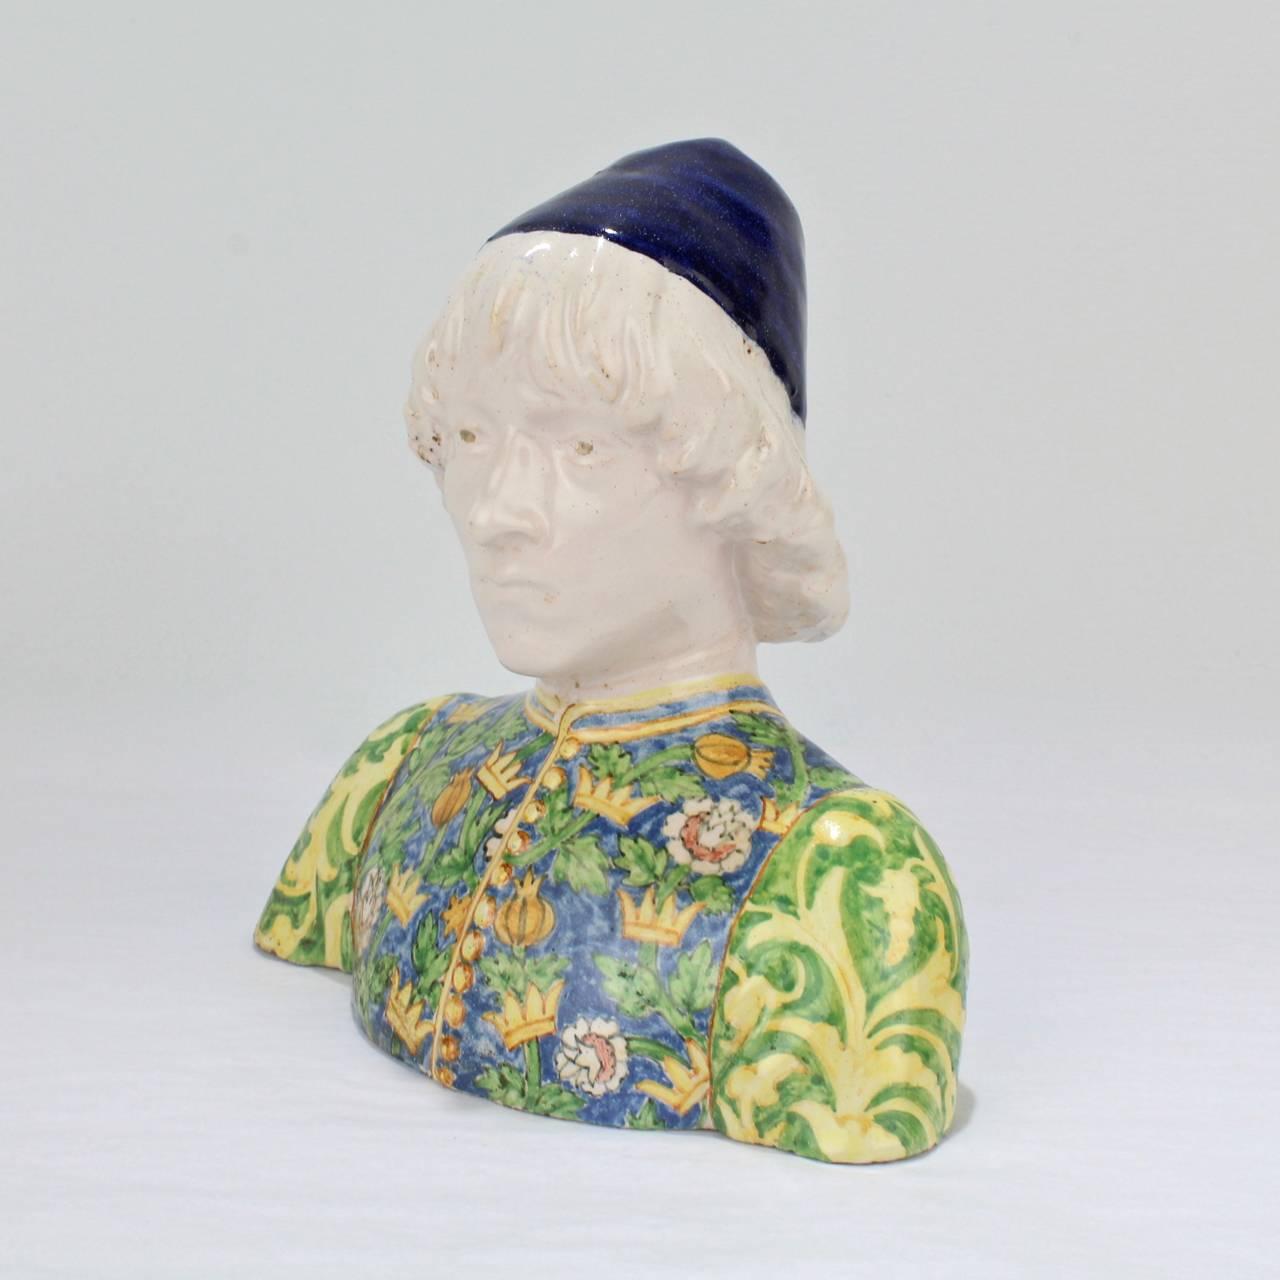 A very fine, antique Italian Maiolica bust of a Renaissance Page or Youth.

Made in the Angelo Minghetti factory in Bologna, Italy in the late 19th or early 20th century.

Angelo Minghetti started producing ceramics at Imola in 1848. He started